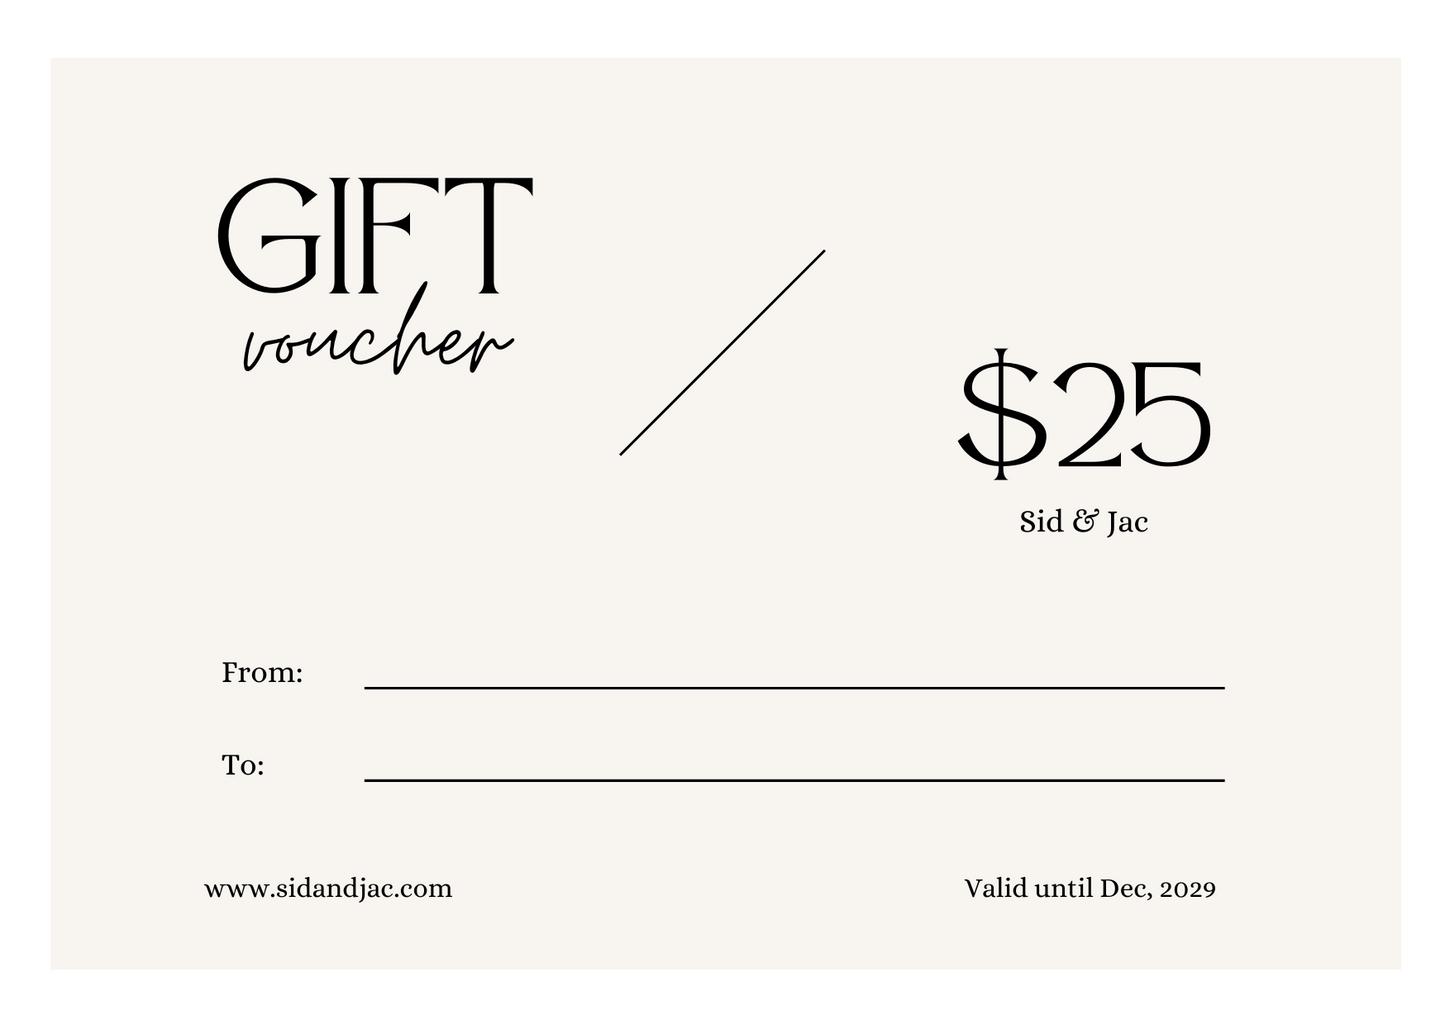 Sid & Jac Gift Cards